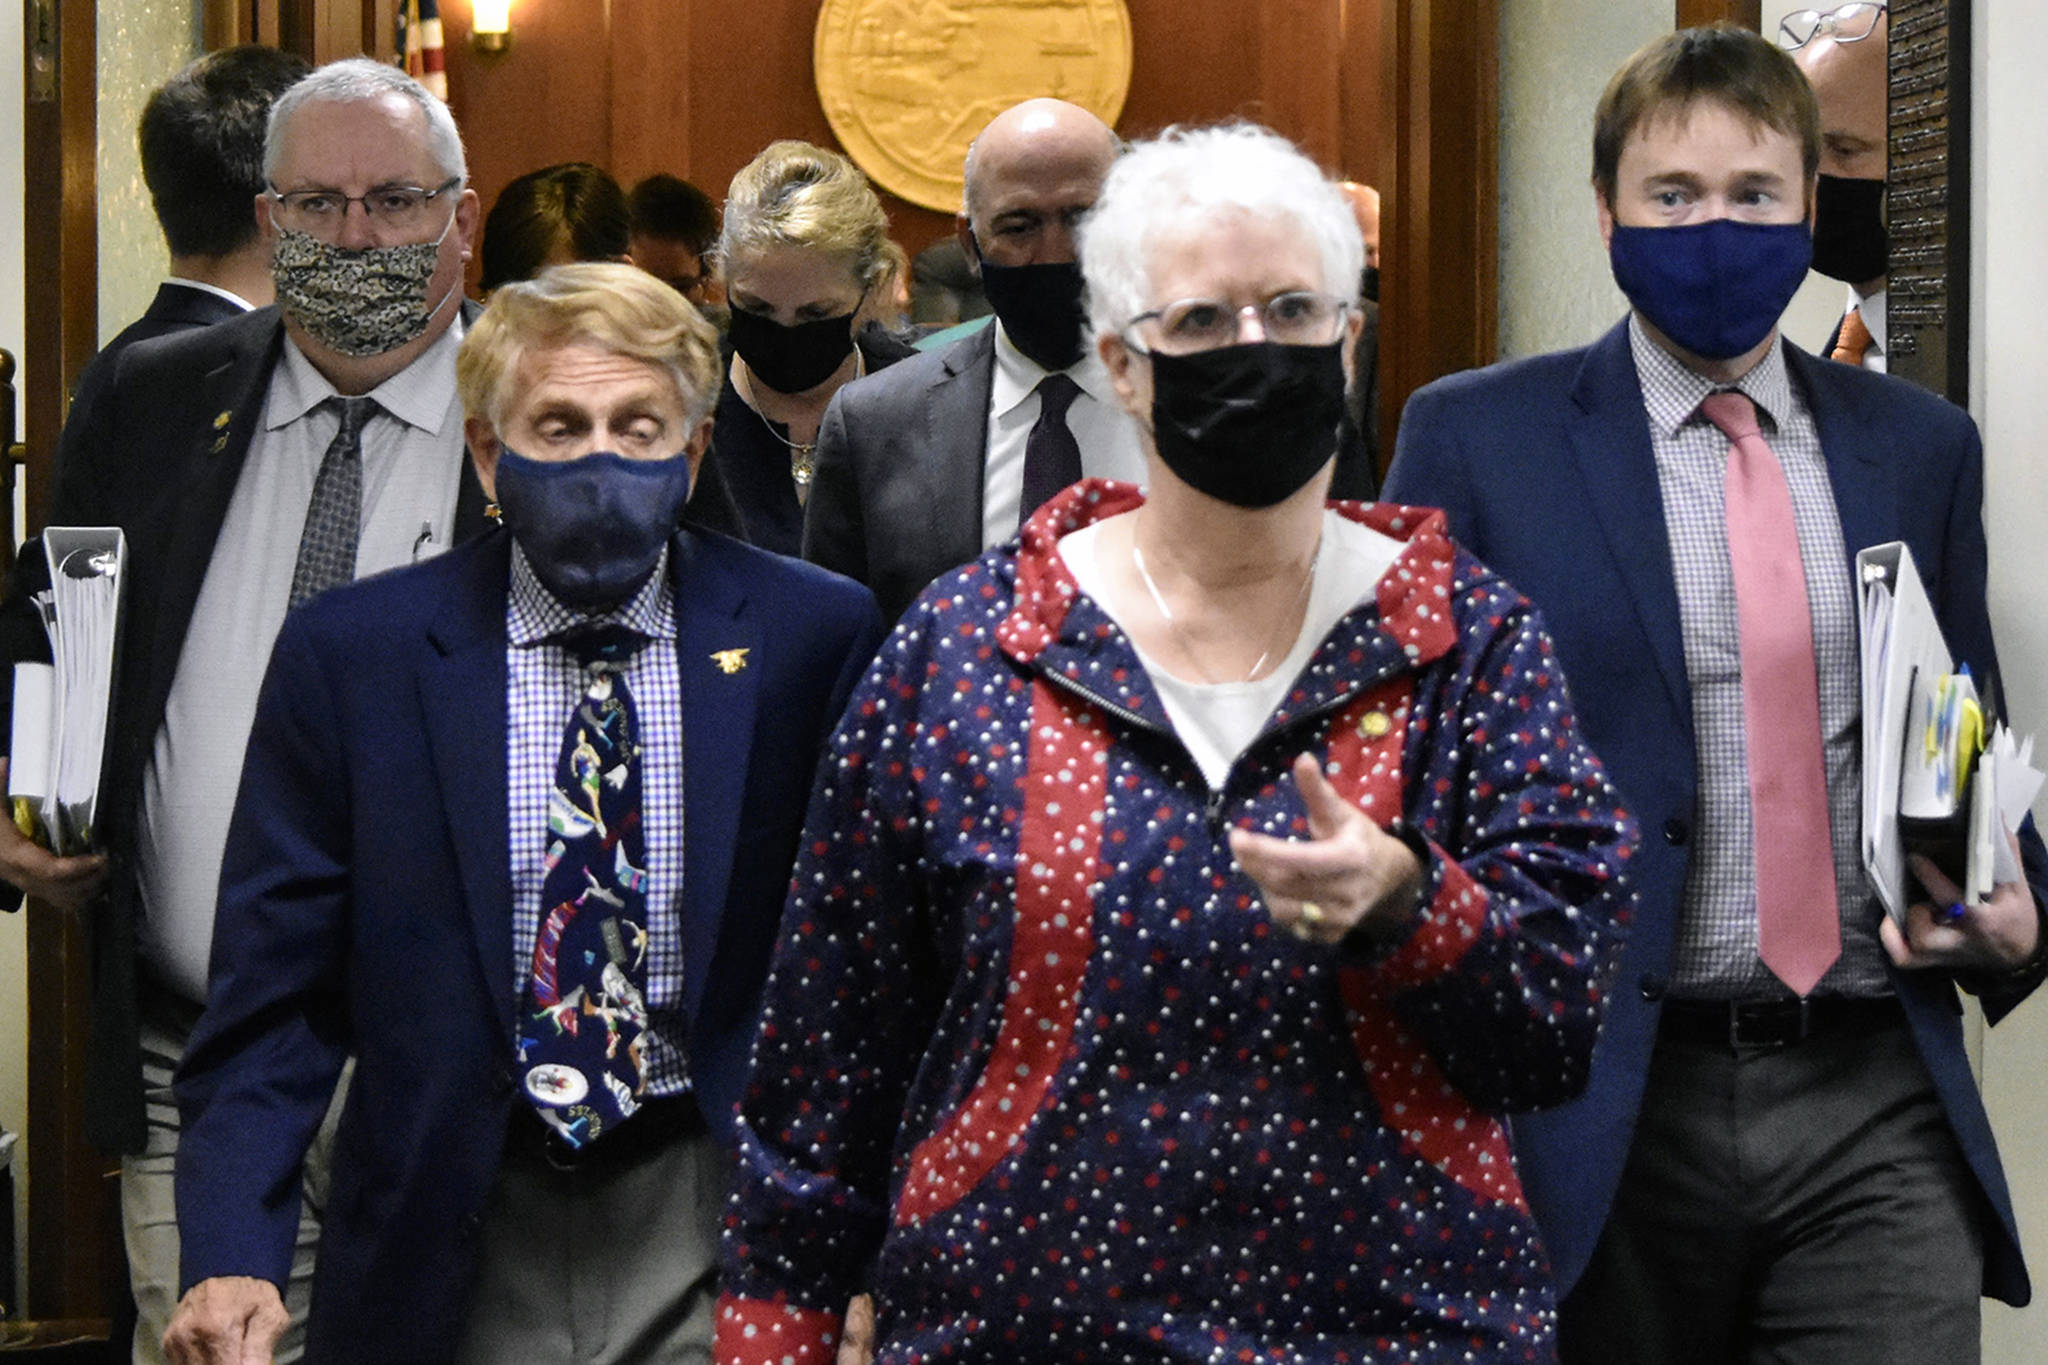 House Speaker Louise Stutes, R-Kodiak, center, leaves the House chambers on Tuesday, Aug. 31, 2021 following marathon floor sessions that morning and Monday night. The House passed an appropriations bill but not before members of the minority voiced deep objections. (Peter Segall / Juneau Empire)